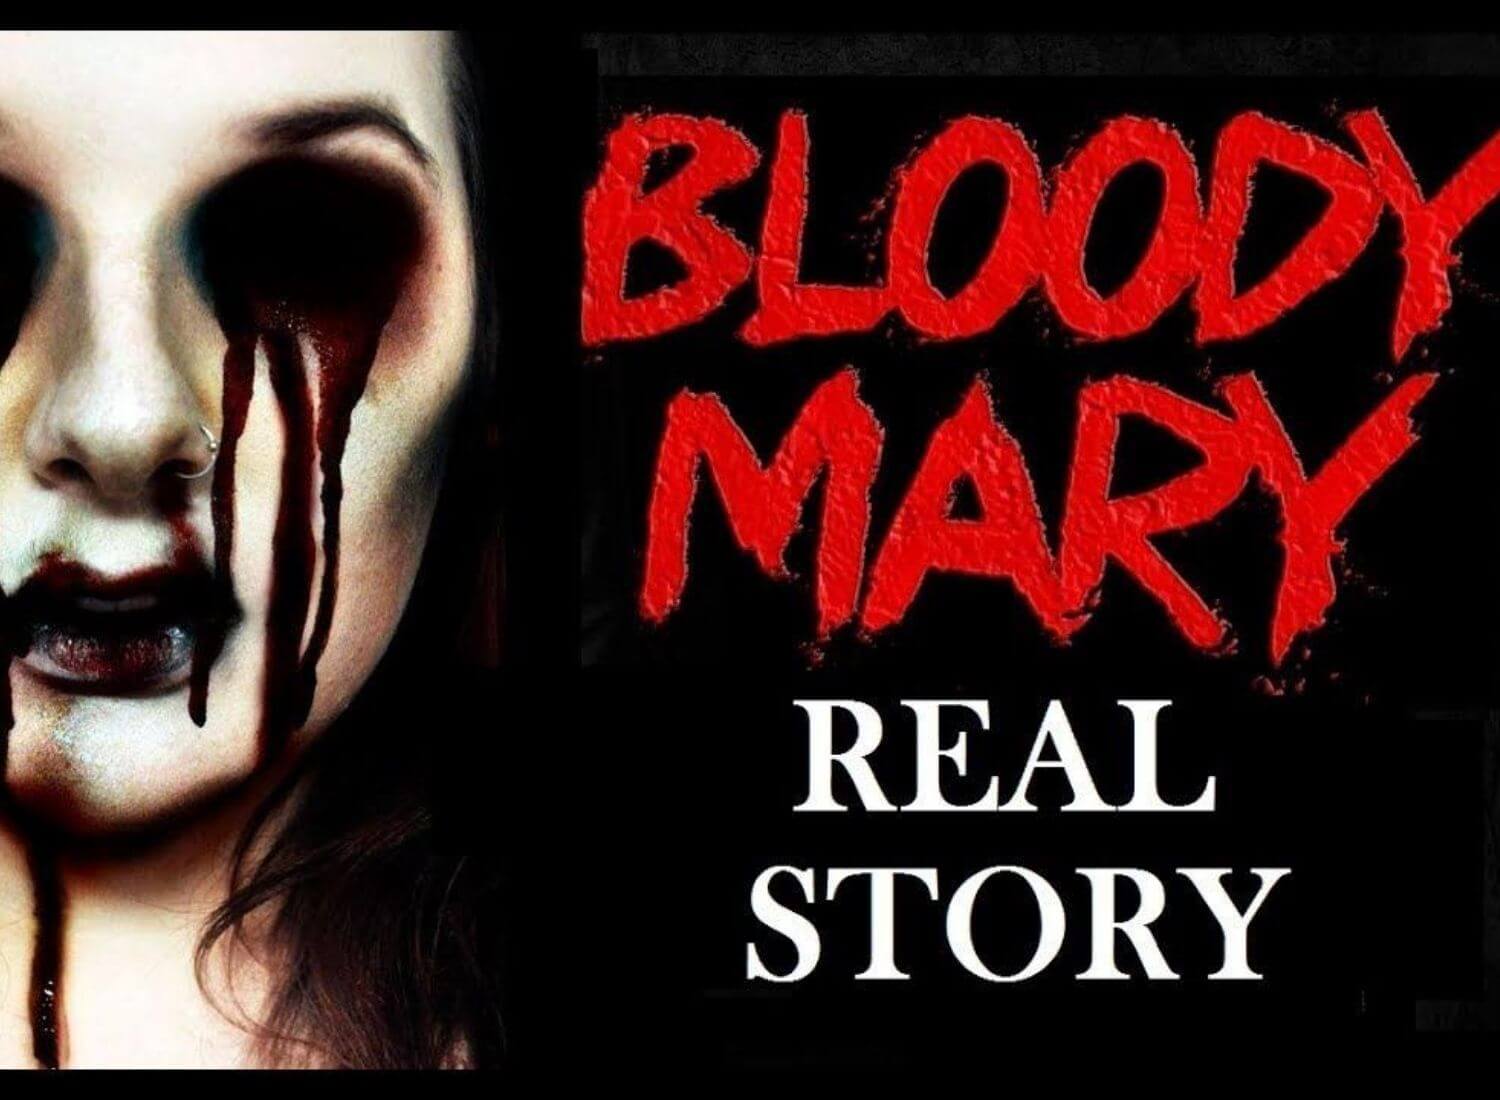 real bloody mary